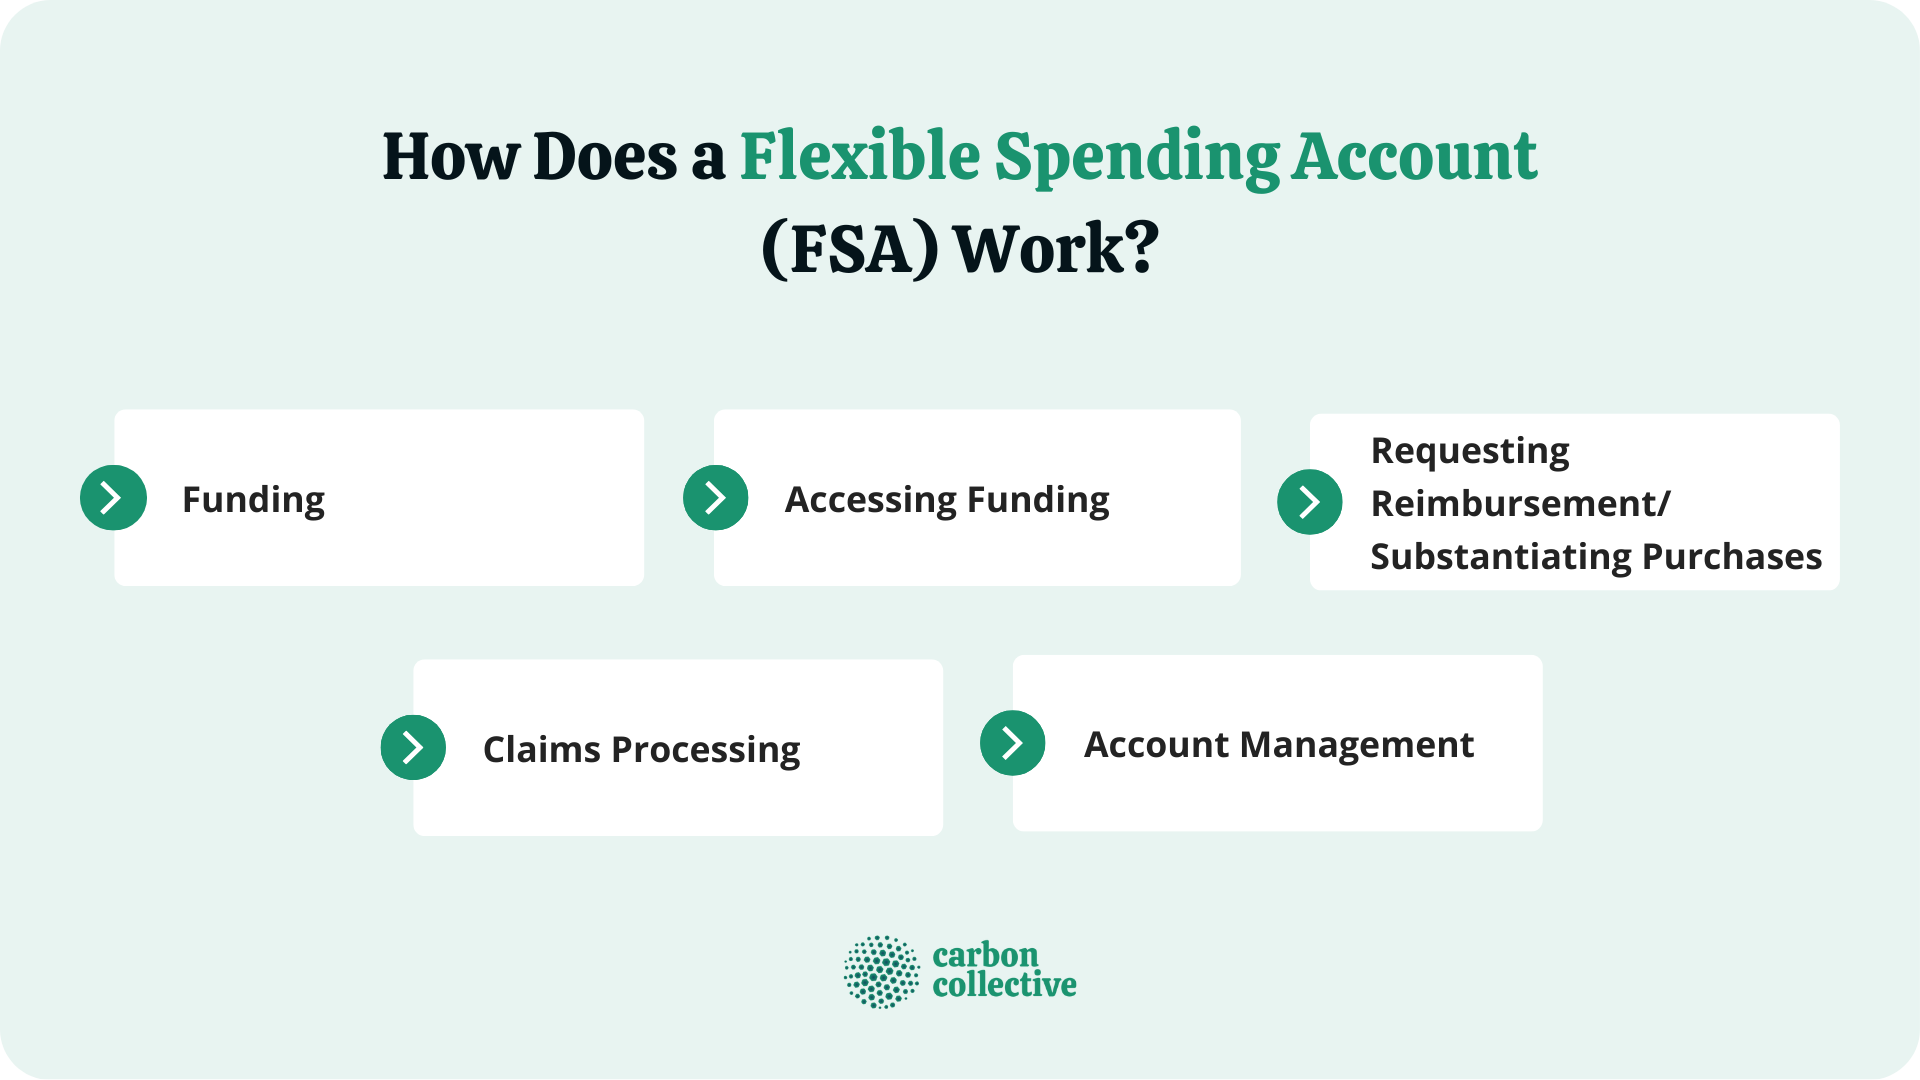 https://www.carboncollective.co/hs-fs/hubfs/How_Does_a_Flexible_Spending_Account_(FSA)_Work.png?width=1920&height=1080&name=How_Does_a_Flexible_Spending_Account_(FSA)_Work.png